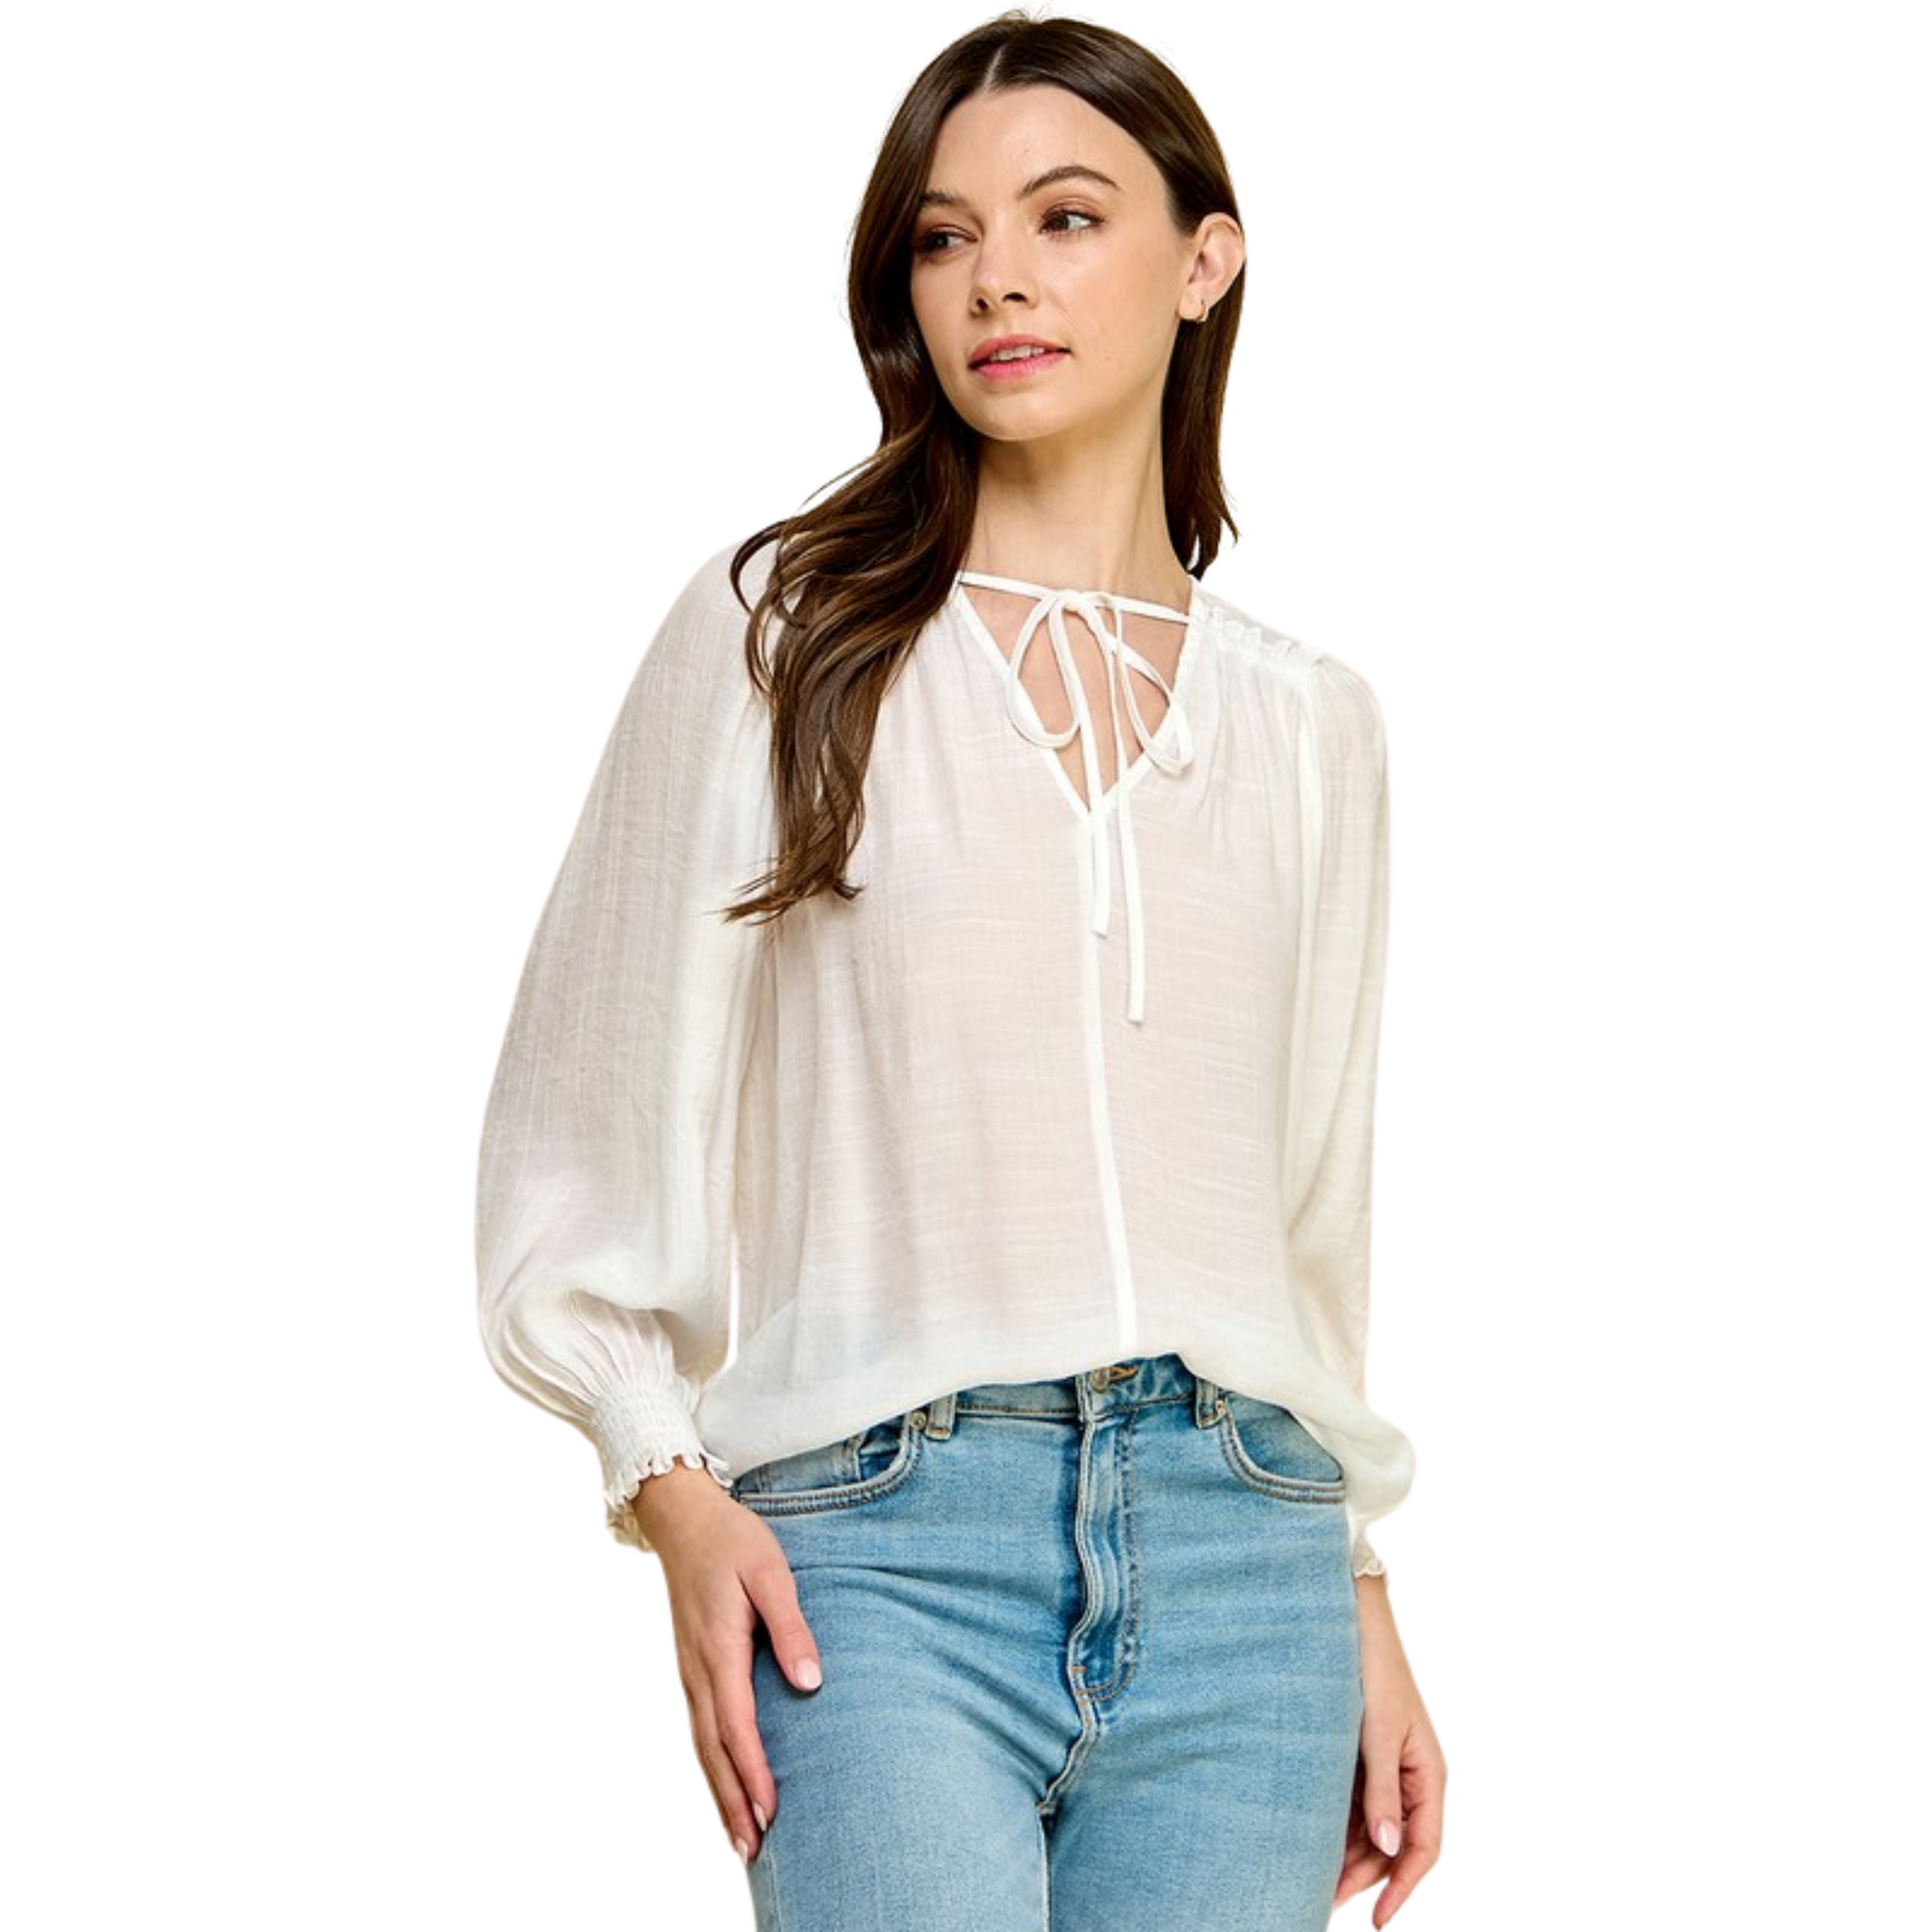 Stay cool in the summer heat with this lightweight Tied Neck Long Sleeve Top. The sheer, white color will keep you looking polished in the sun while the tie top ensures a flattering fit. Enjoy the lightweight material for a comfortable look all season.